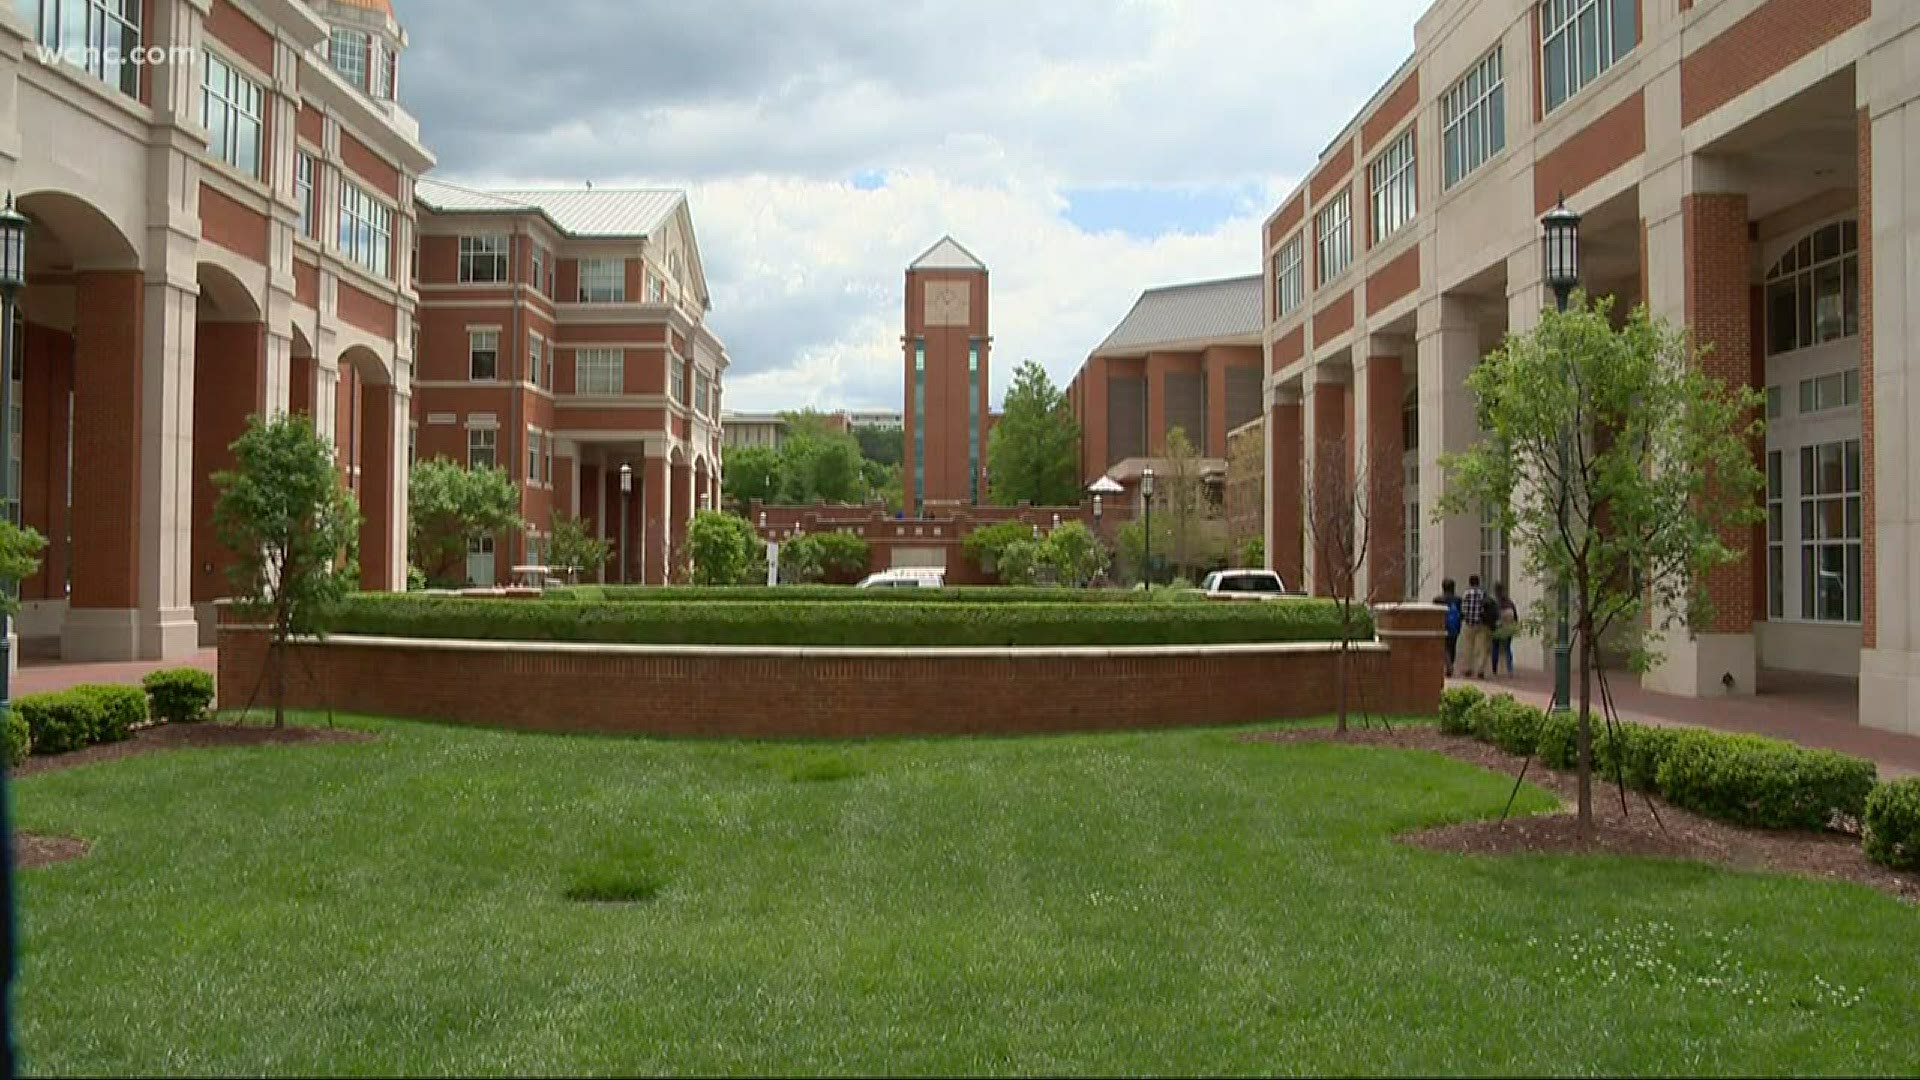 Big changes coming to UNC Charlotte for fall semester due to COVID19